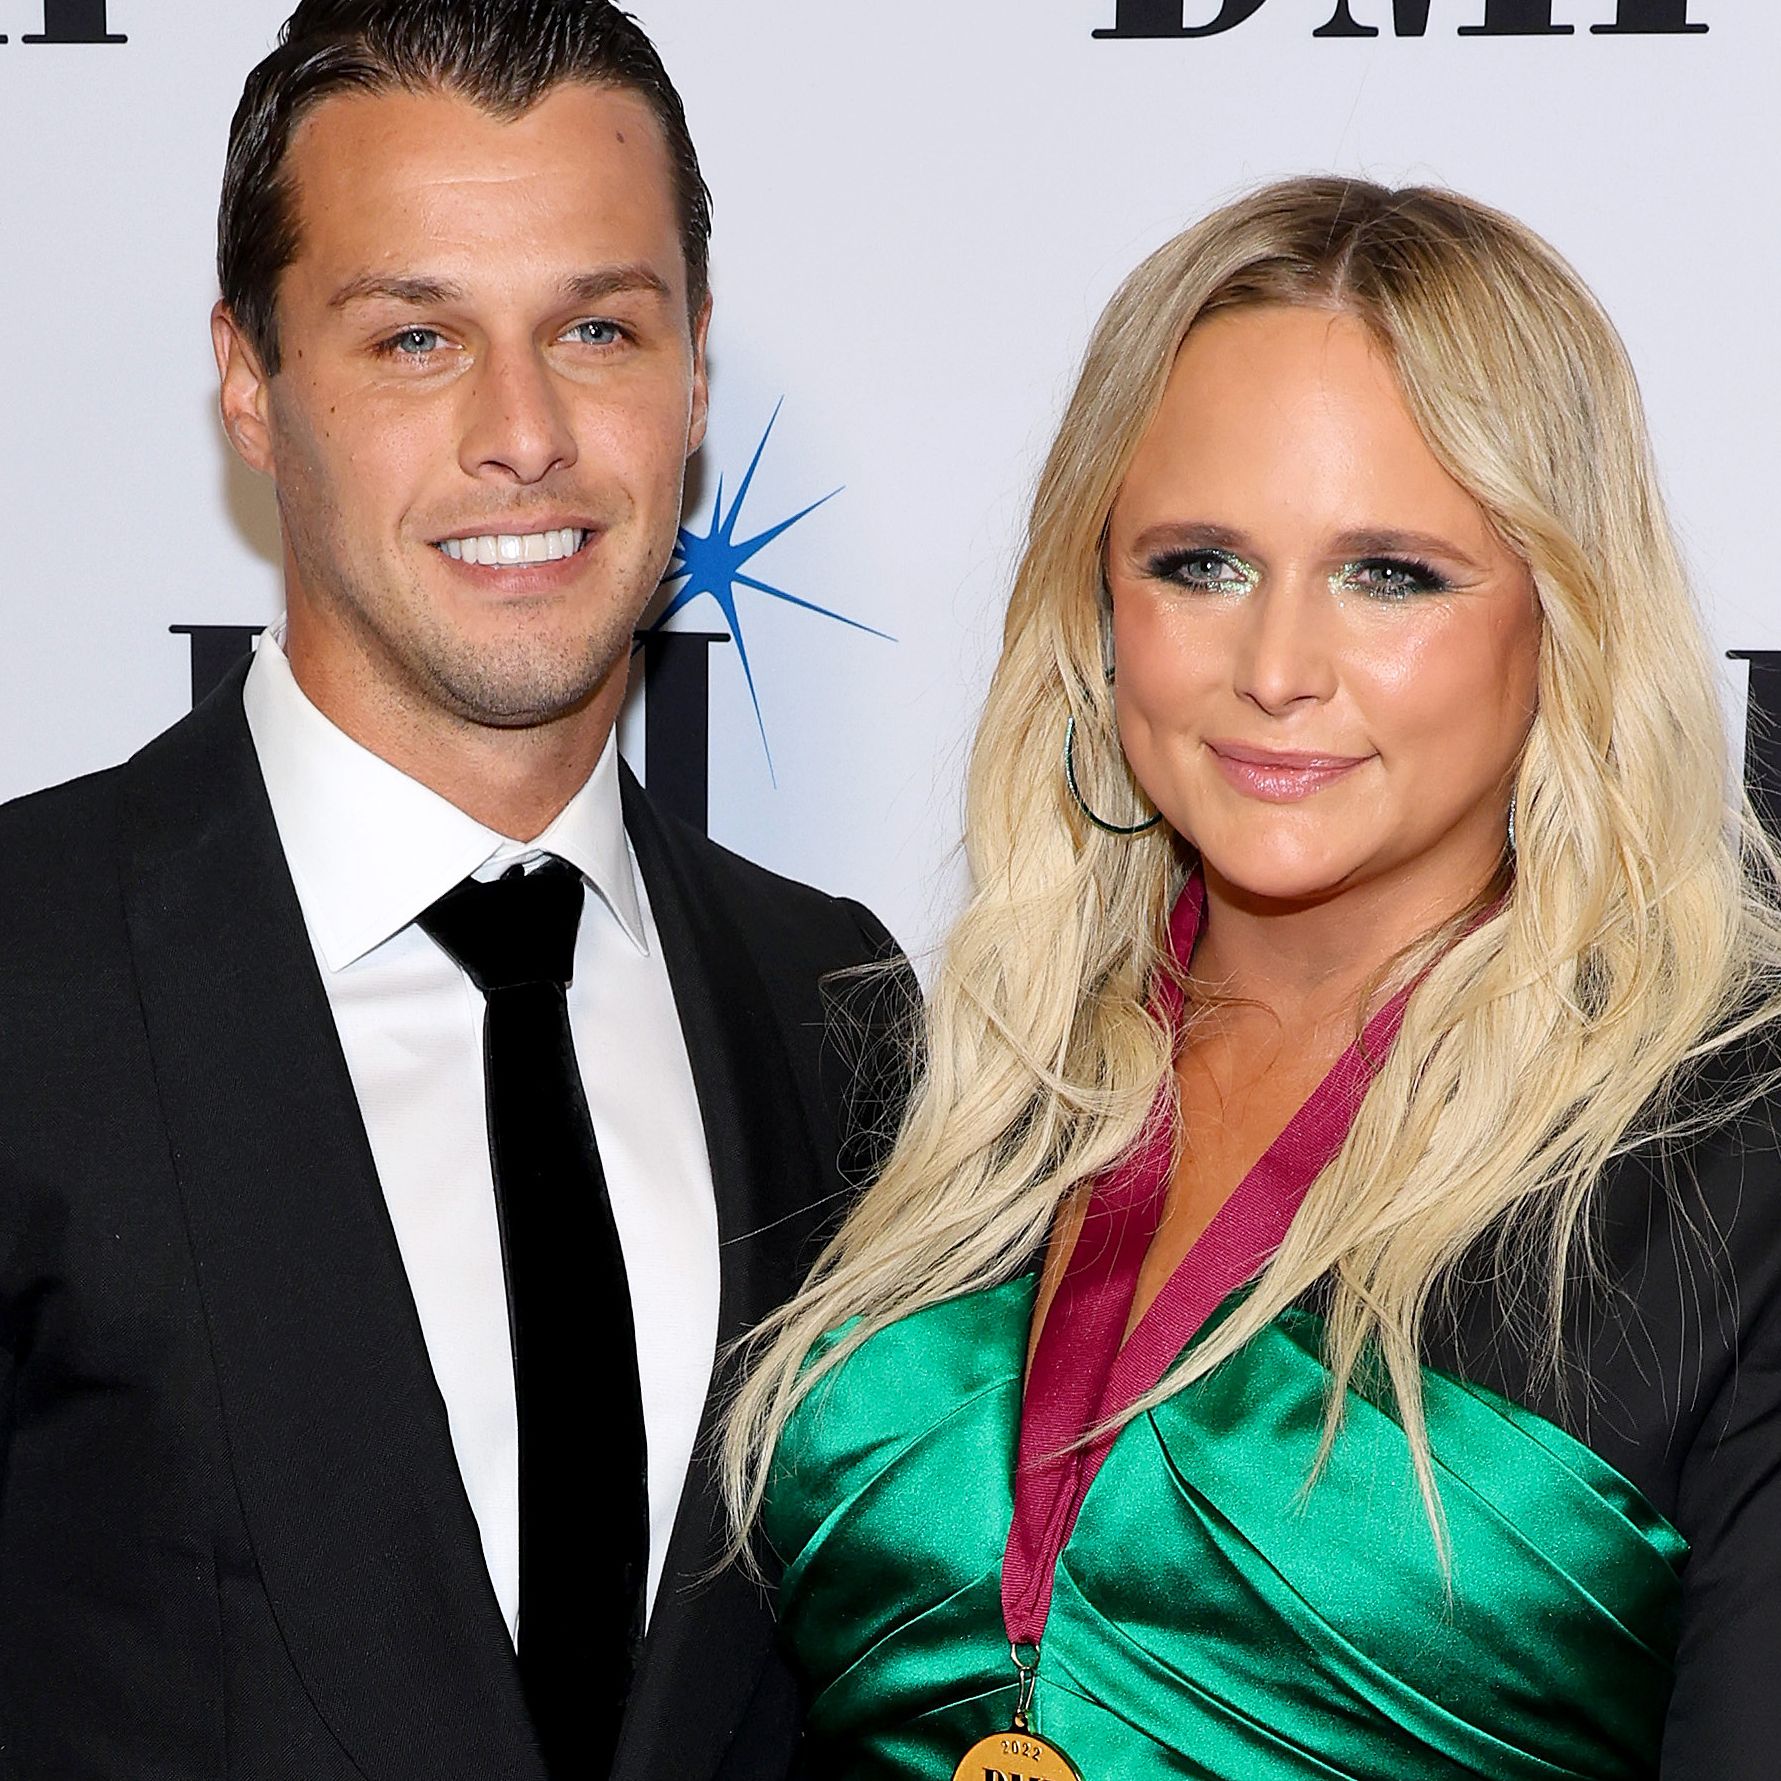 See Why Miranda Lambert Fans Are Going Wild Over Her Husband's Dancing IG Video